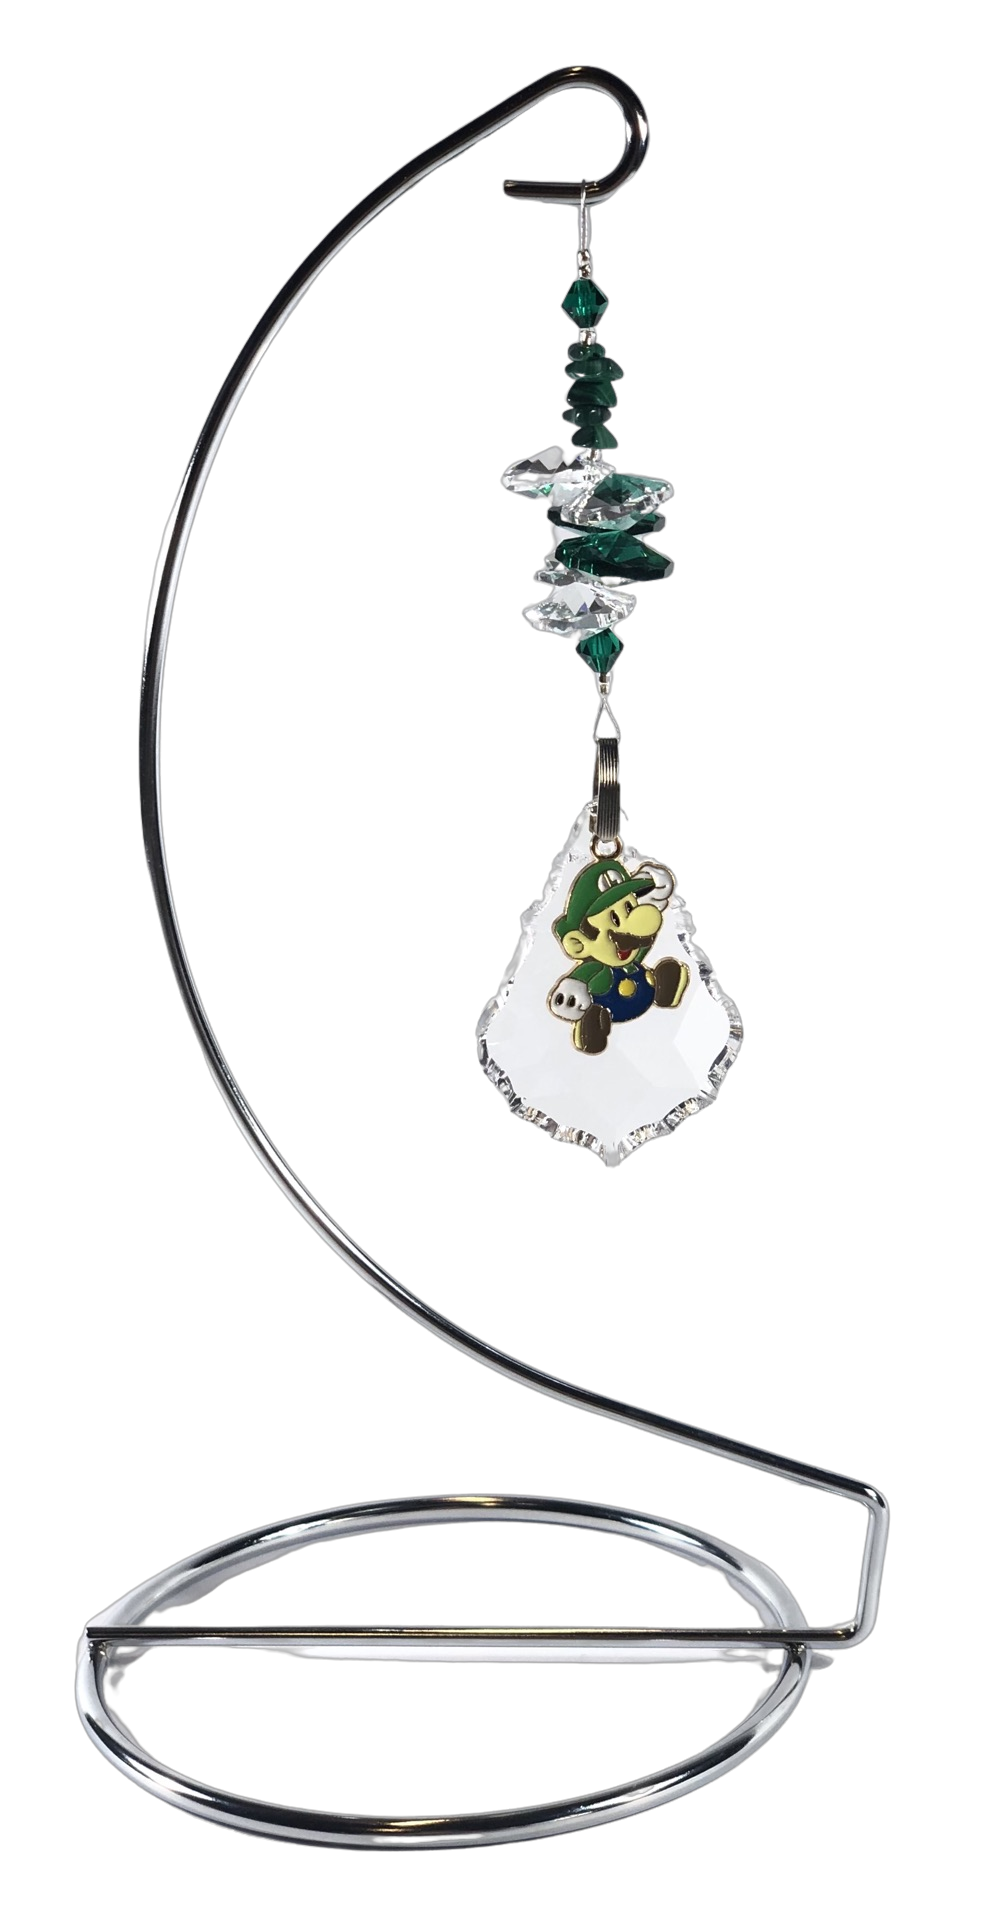 Mario - Luigi crystal suncatcher is decorated with malachite gemstones and come on this amazing stand.